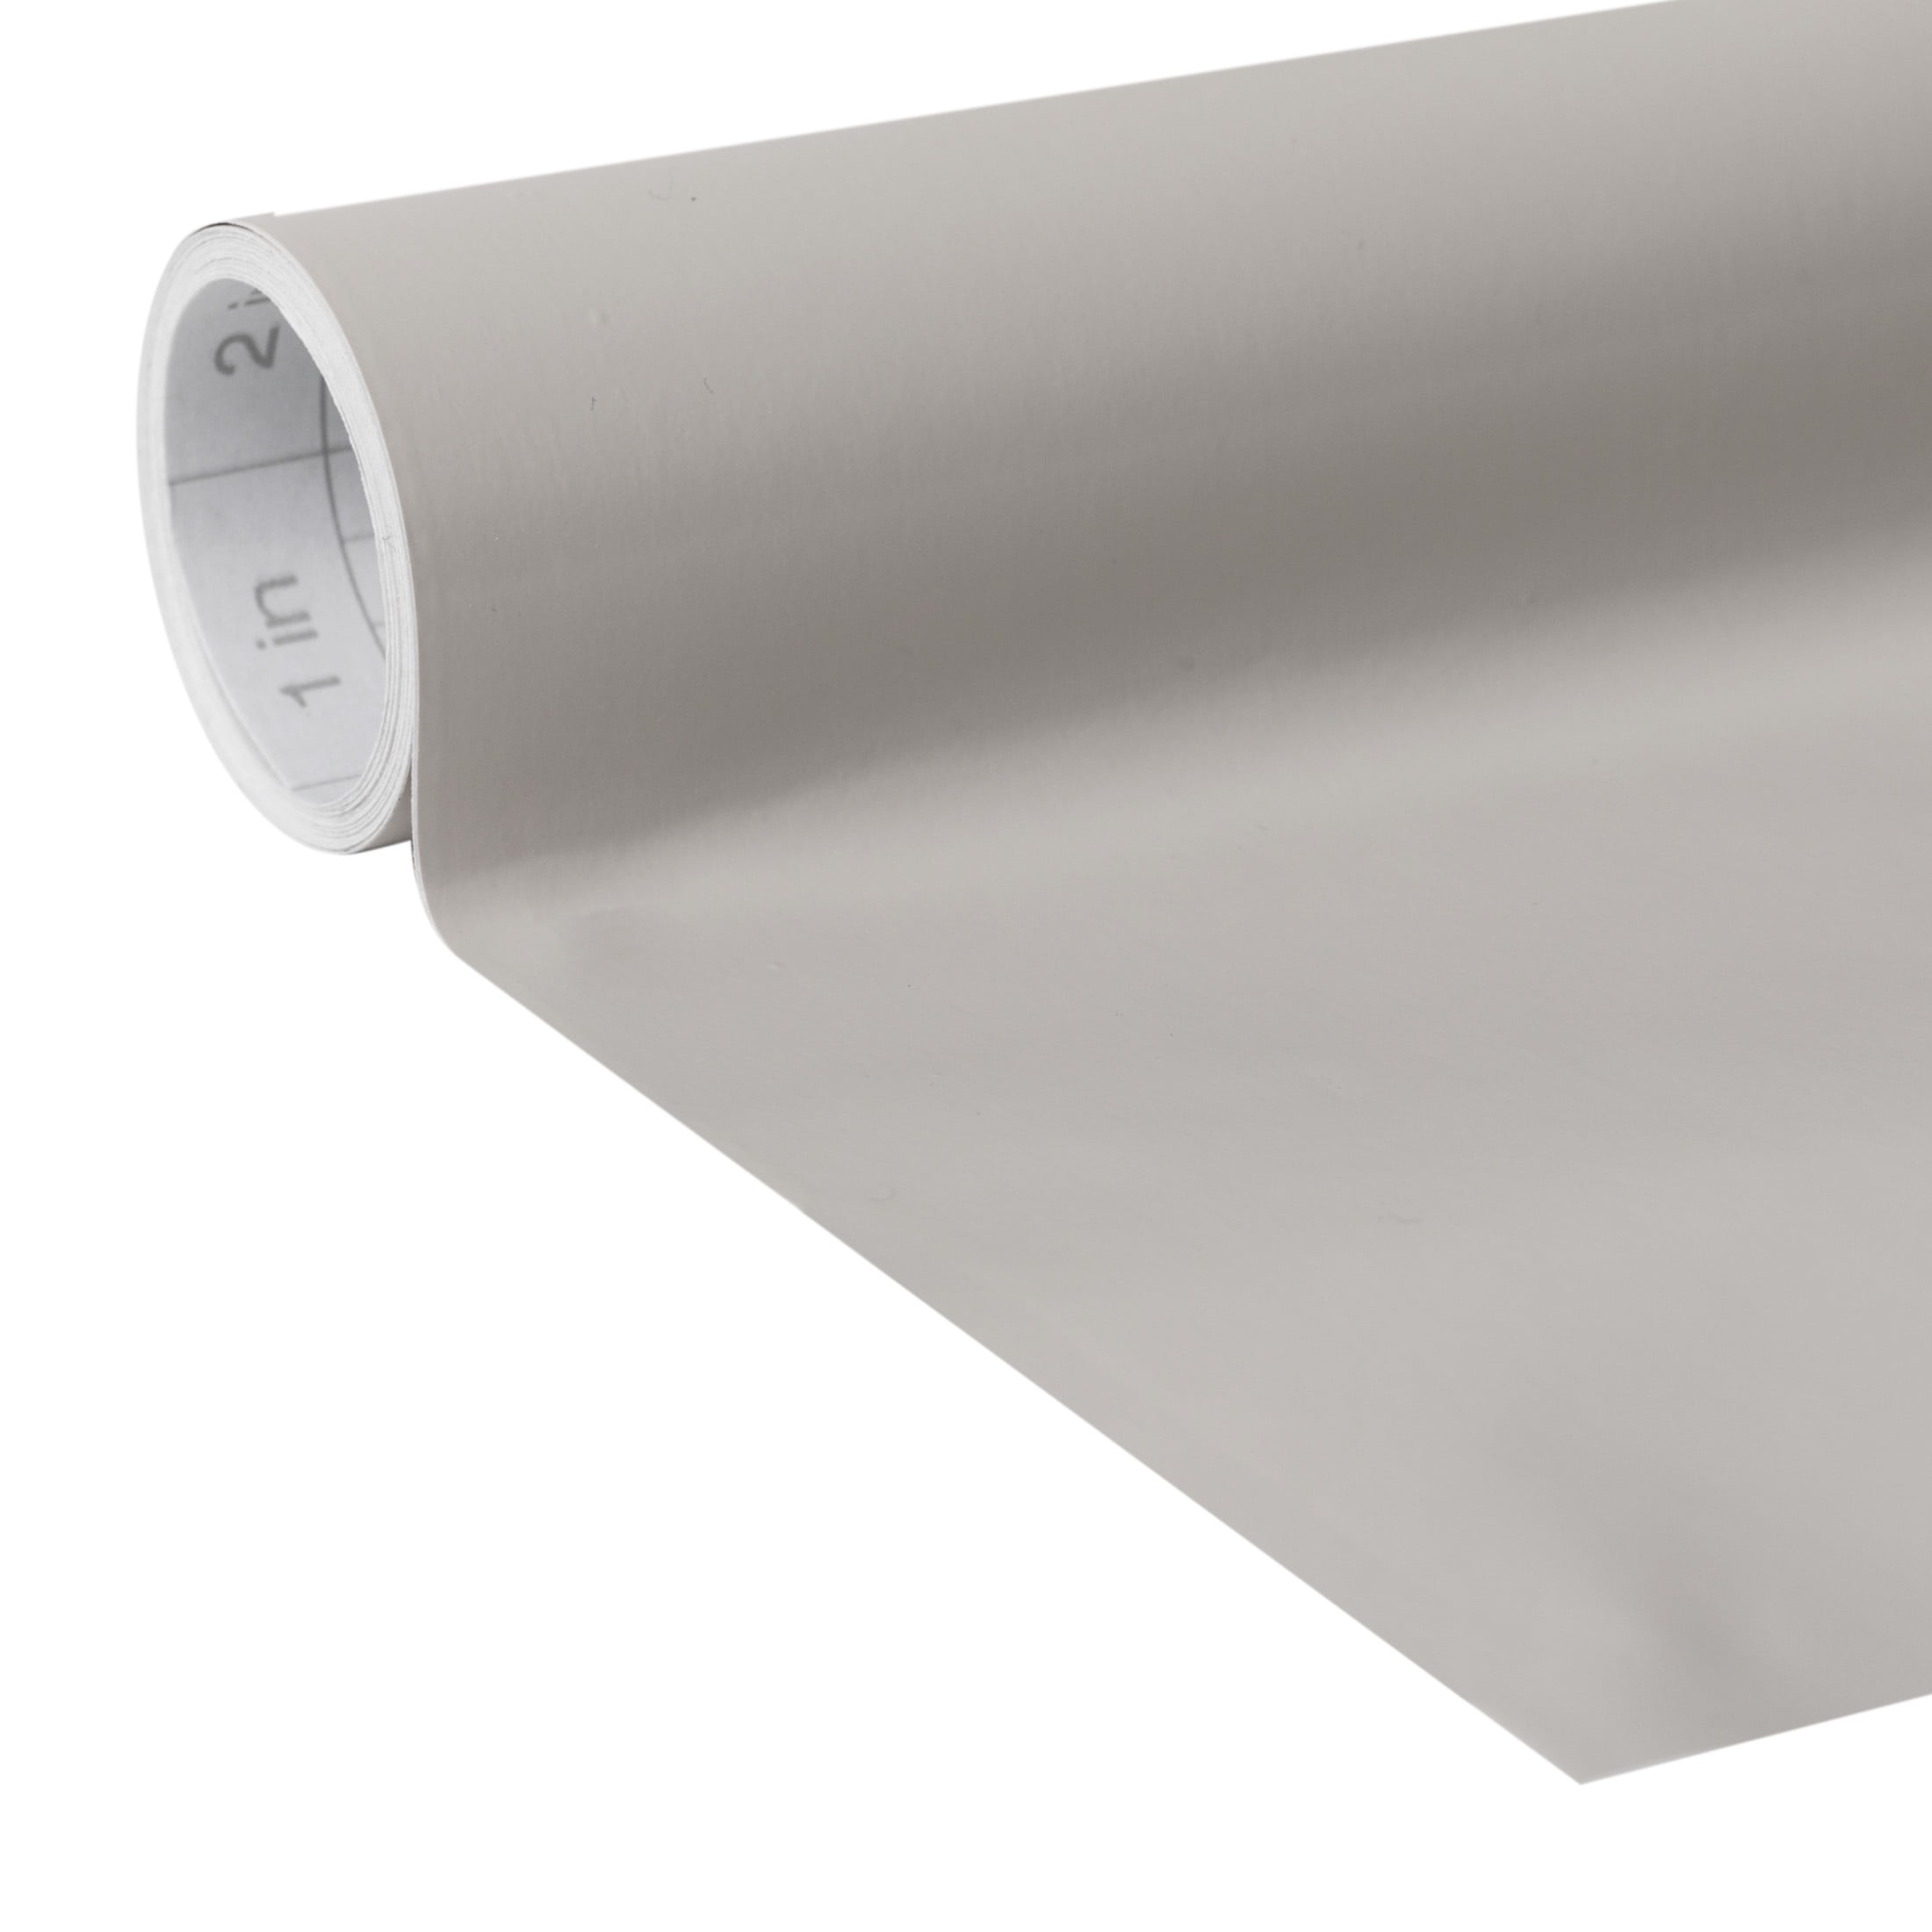 EasyLiner Brand Contact Paper Adhesive Shelf Liner, Gray Marble, 20 in. x  15 ft. Roll 